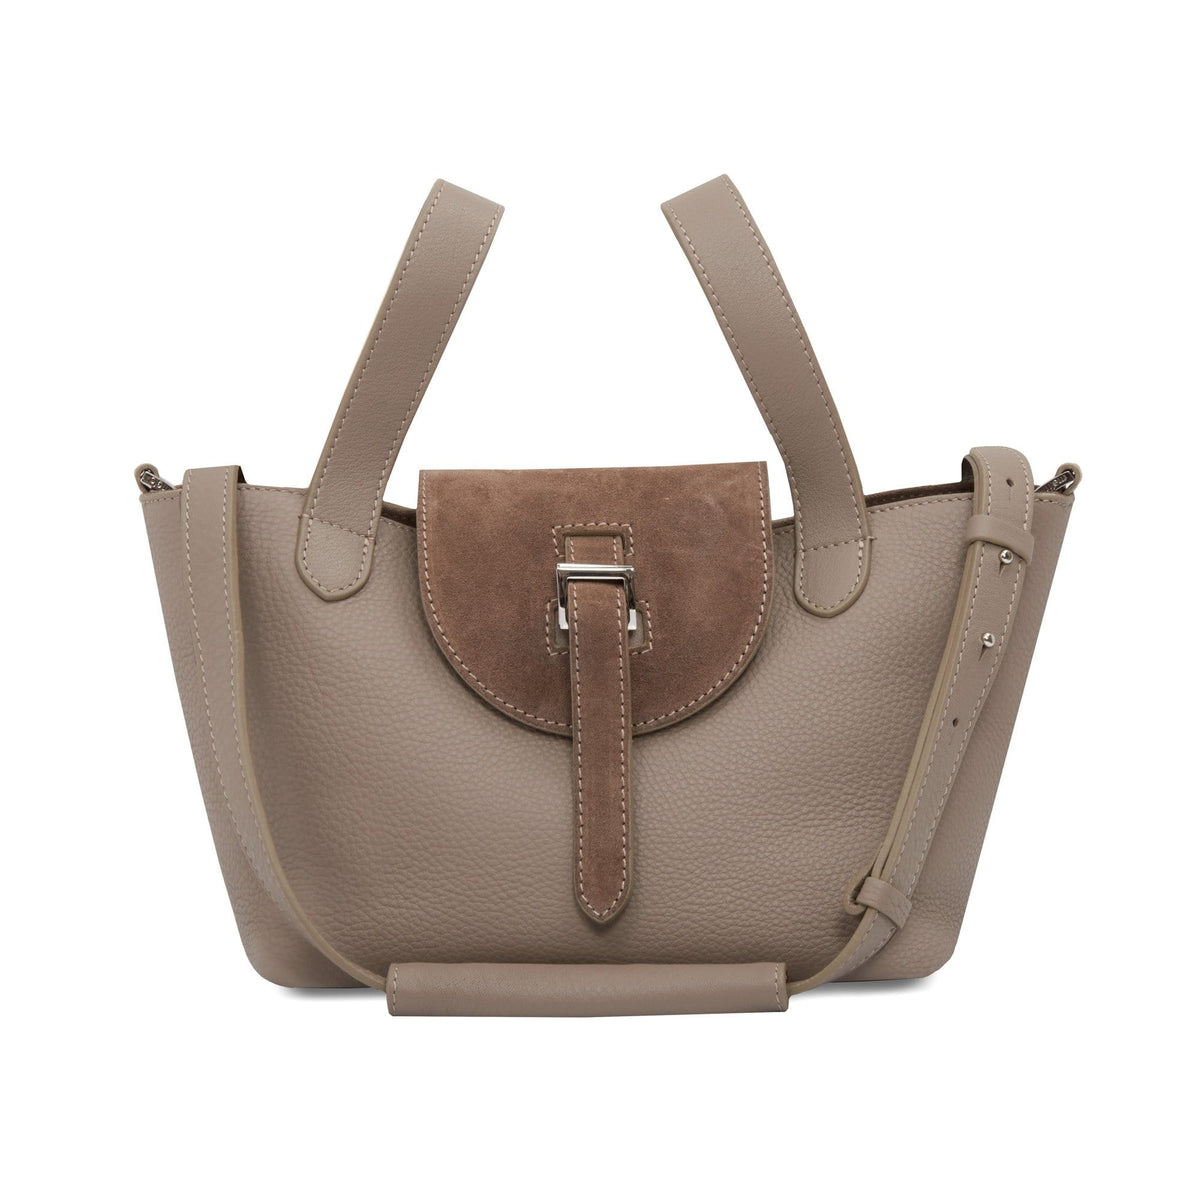 Thela Mini Taupe and Pink with Zip Closure Cross Body Bag for